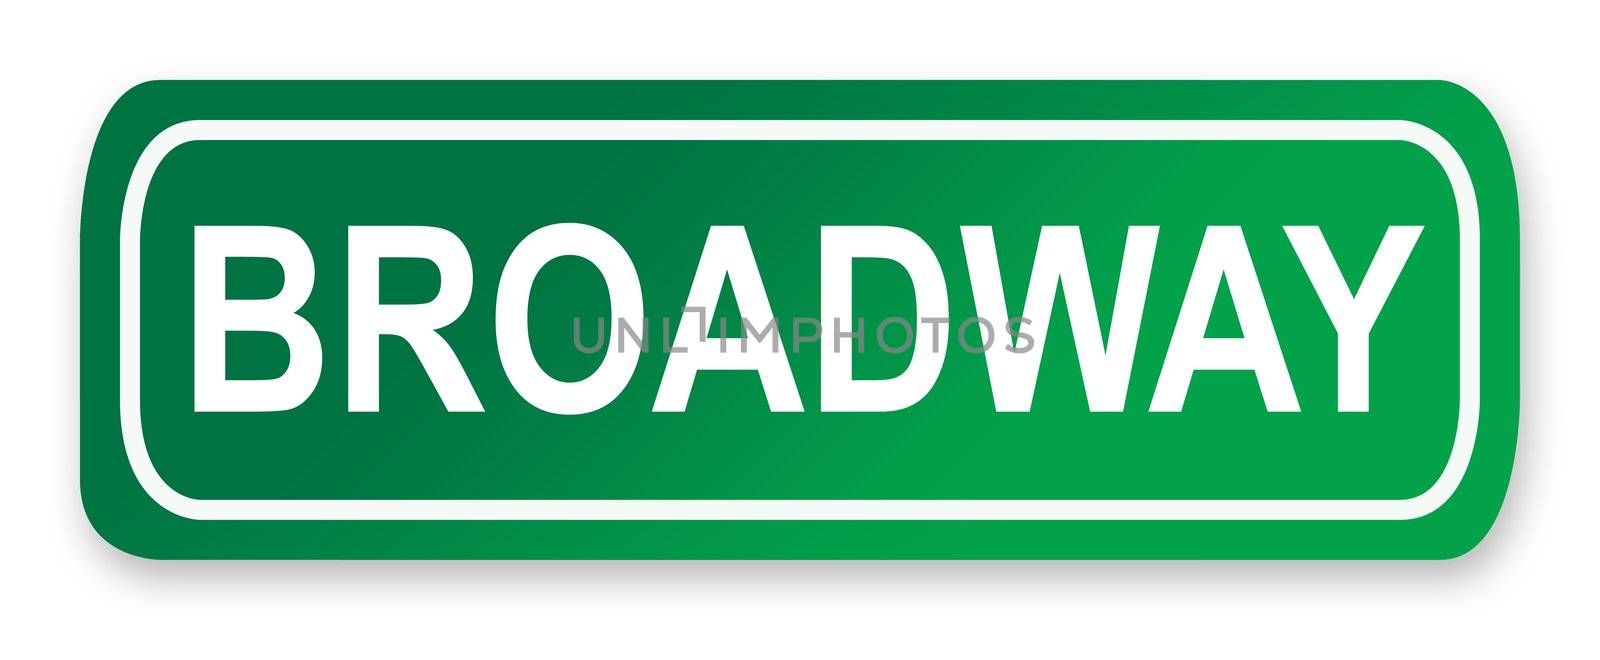 Broadway street sign; isolated on white background, New York City, America.